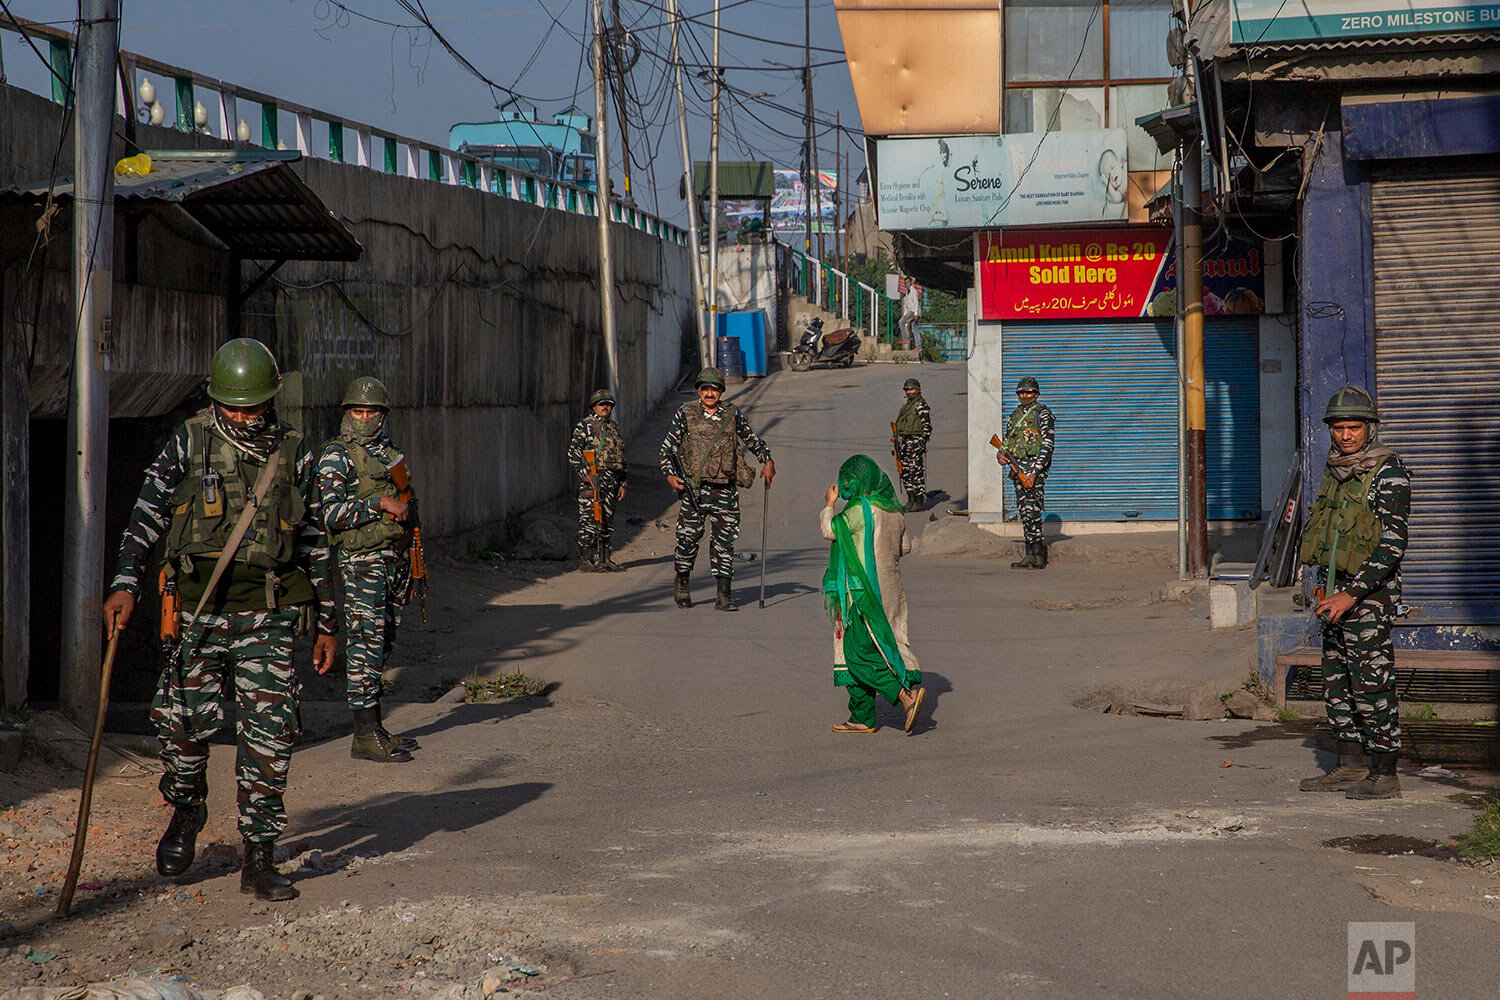  A Kashmiri woman covers her face with a scarf as she walks past paramilitary soldiers standing guard in a closed market area in Srinagar, Indian controlled Kashmir, Friday, Sept. 3, 2021. (AP Photo/ Dar Yasin) 